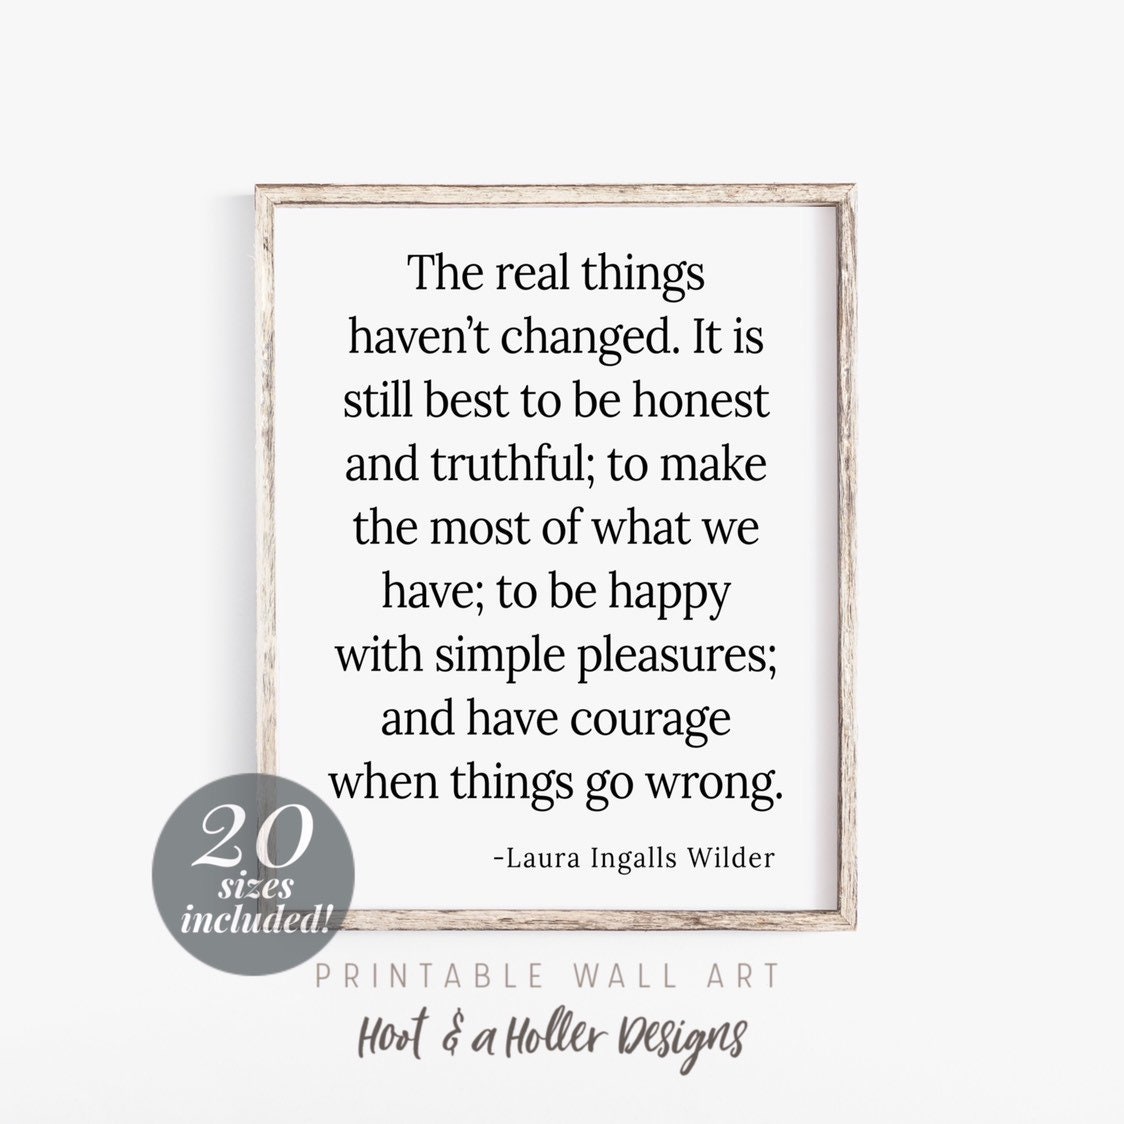 Arvier inspirational quote Framed Art Laura Ingalls Wilder Framed Print black white wall art quote print The Real Things Havent Changed FRAMED WALL ART 